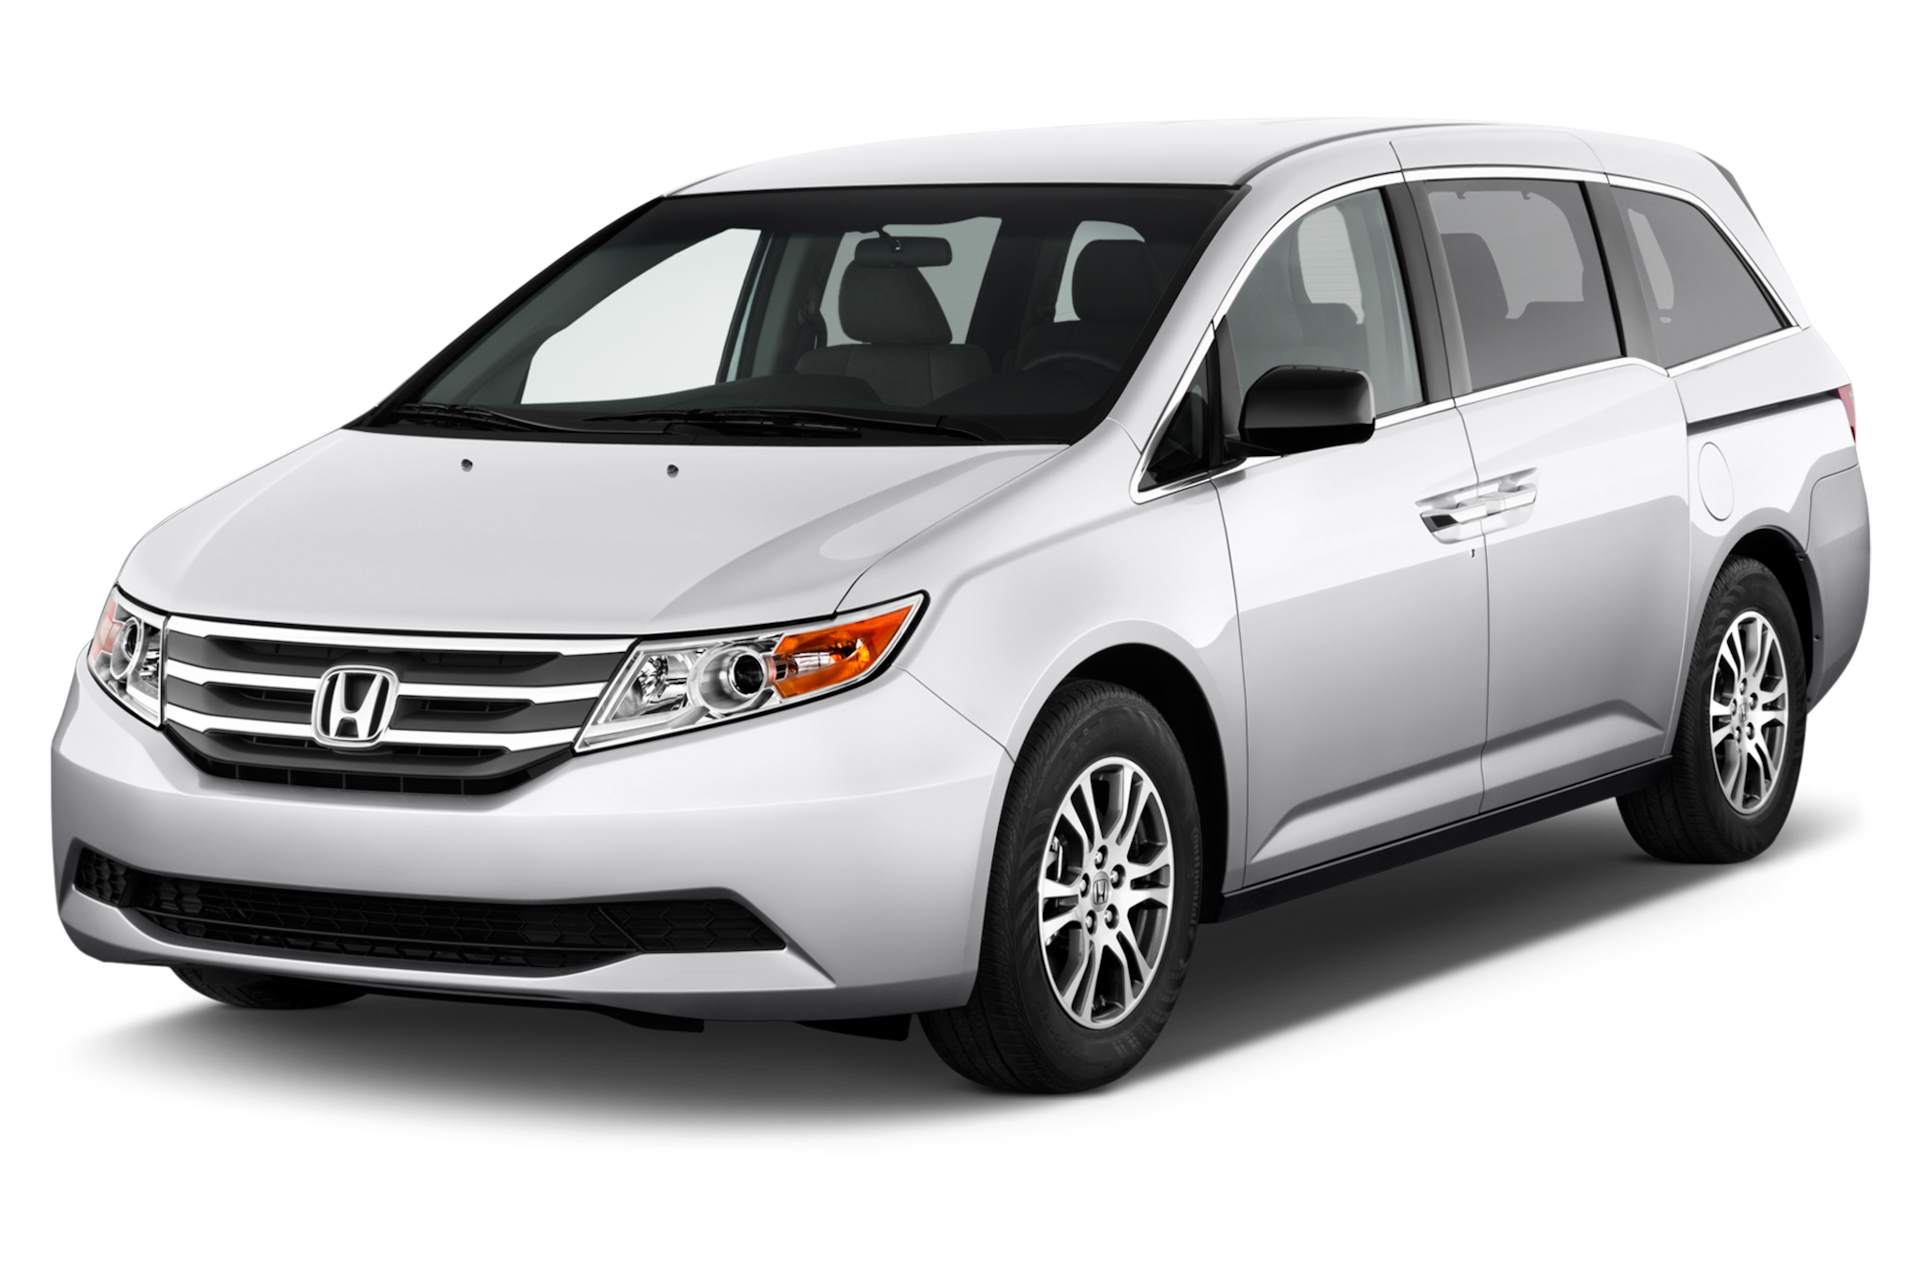 2013 Honda Odyssey Prices, Reviews, and Photos - MotorTrend